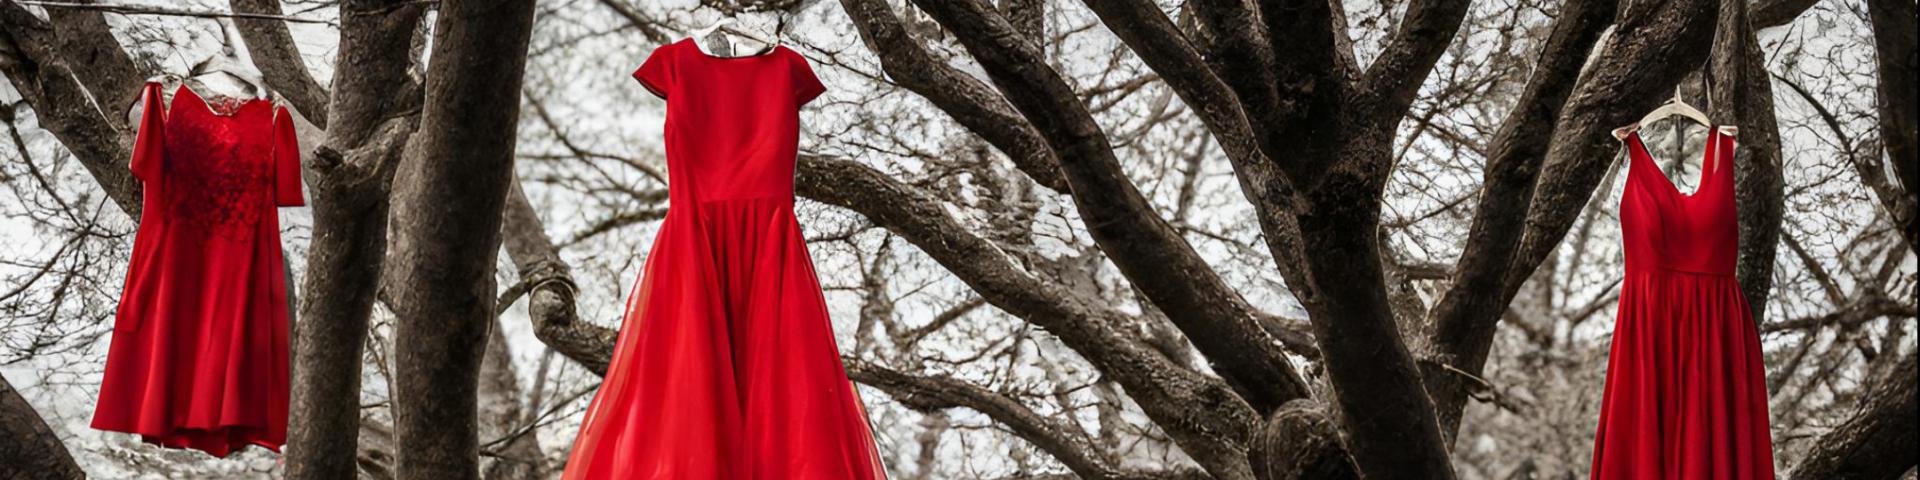 Red dresses hanging from a tree